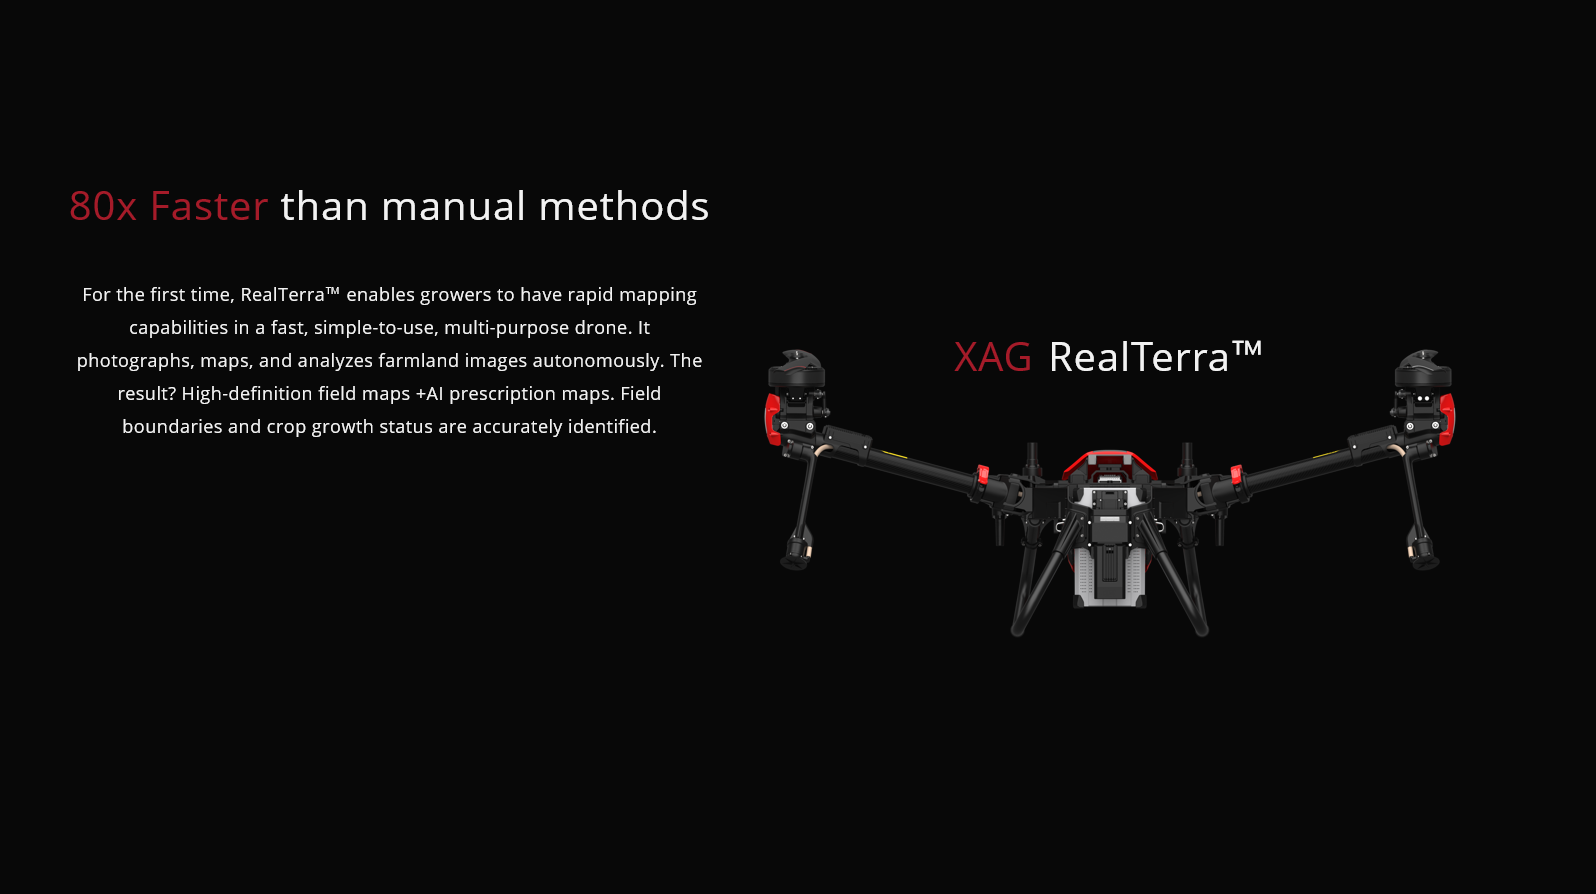 XAG V40 15L Agricultural Drone, realTerra" enables growers to have rapid mapping capabilities in a simple-to